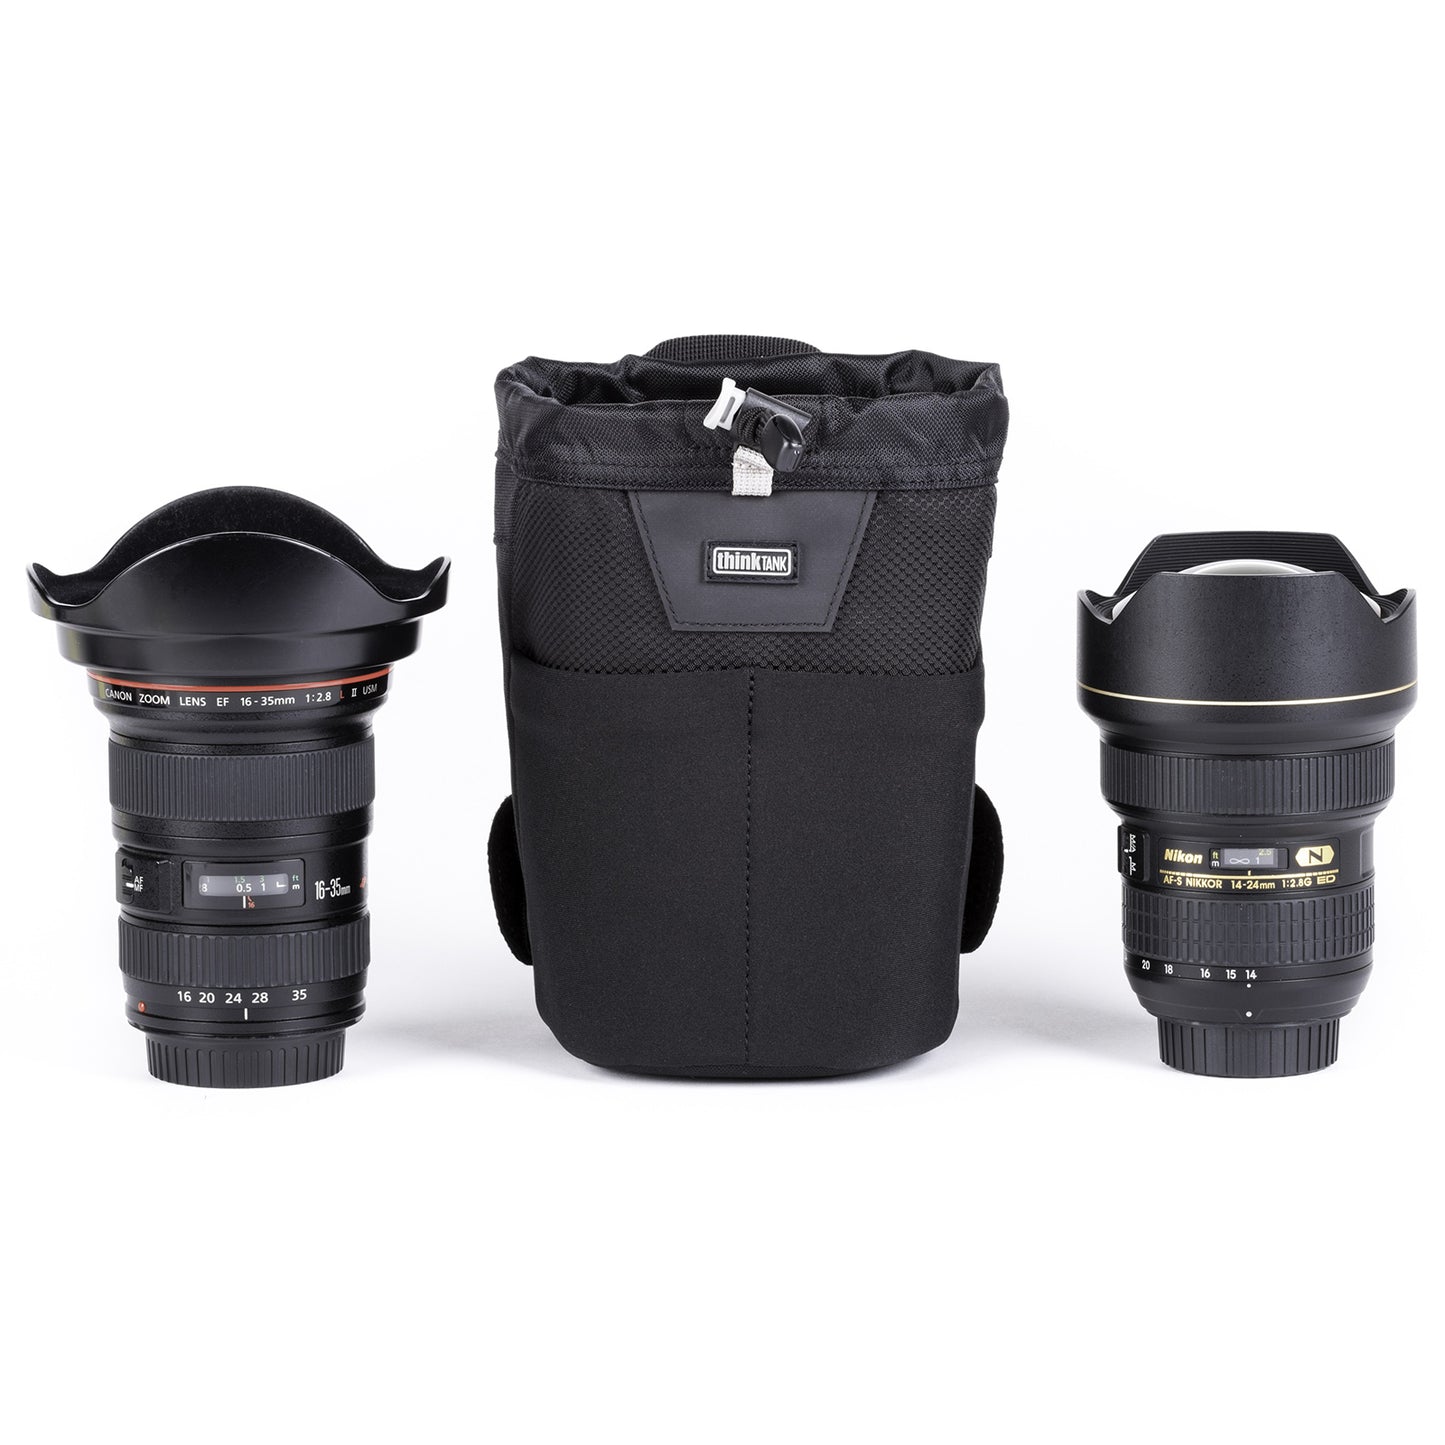 
                  
                    Fits wide-angle lenses with hoods in shooting position. Like 16–35mm f/2.8 or 11–24mm f/4 or 24mm f/1.4 or 14–24mm f/2.8 each with the lens hood in the shooting position
                  
                